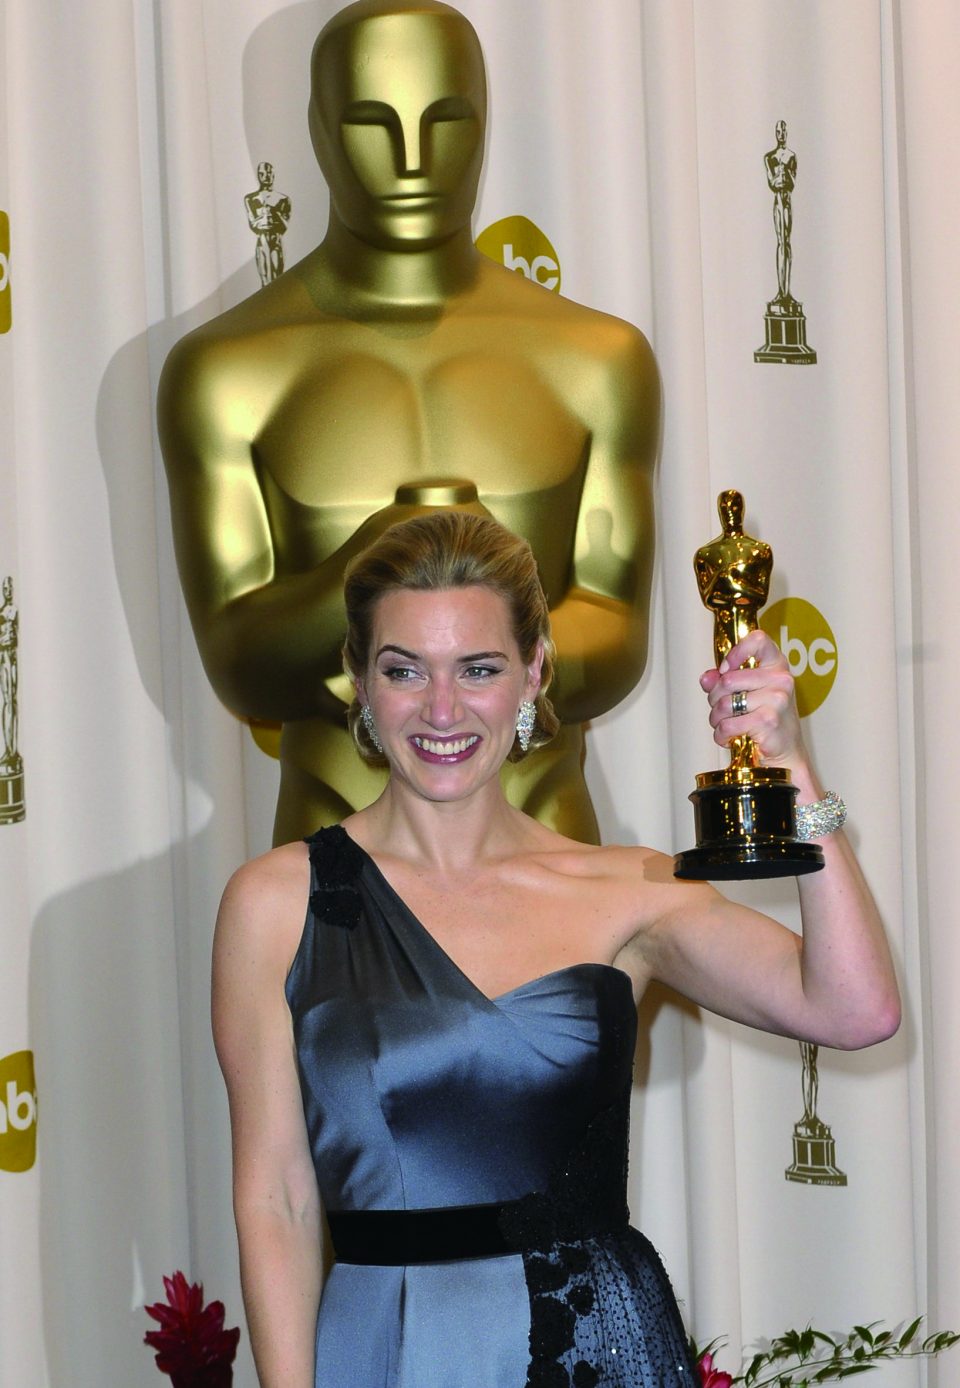 (090223) -- HOLLYWOOD, Feb. 23, 2009 (Xinhua) -- Kate Winslet poses with her trophy for best actress of the 81st Academy Awards for "The Reader" at the Kodak Theater in Hollywood, California, the United States, Feb. 22, 2009. (Xinhua/Qi Heng) (msq)